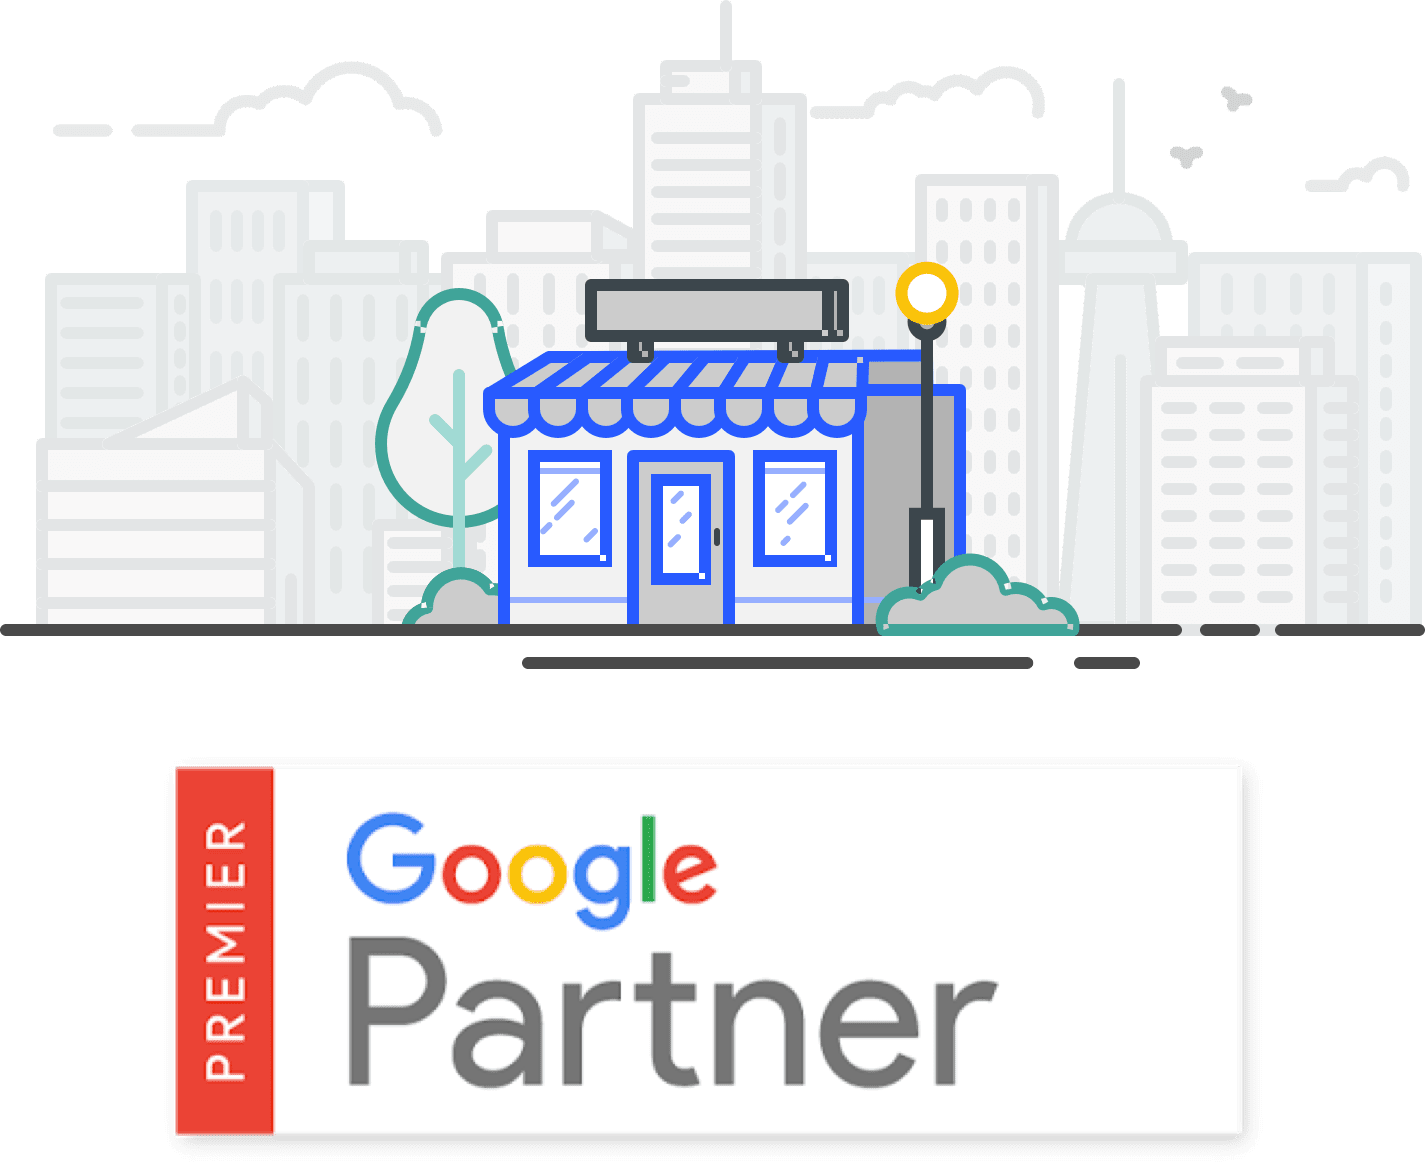 Google my business partner badge and icon